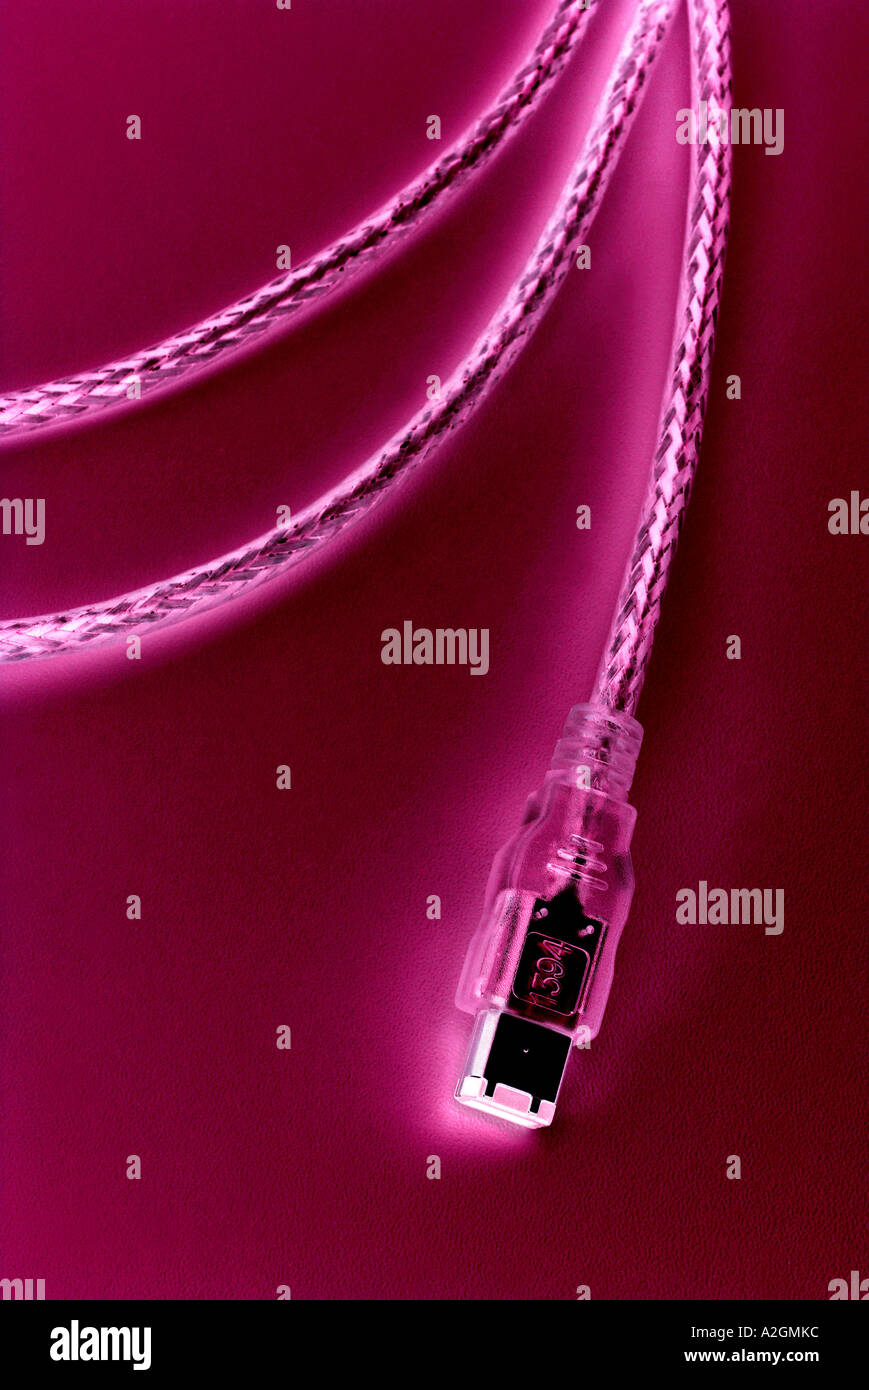 Firewire DV IEEE 1394a cable Stock Photo